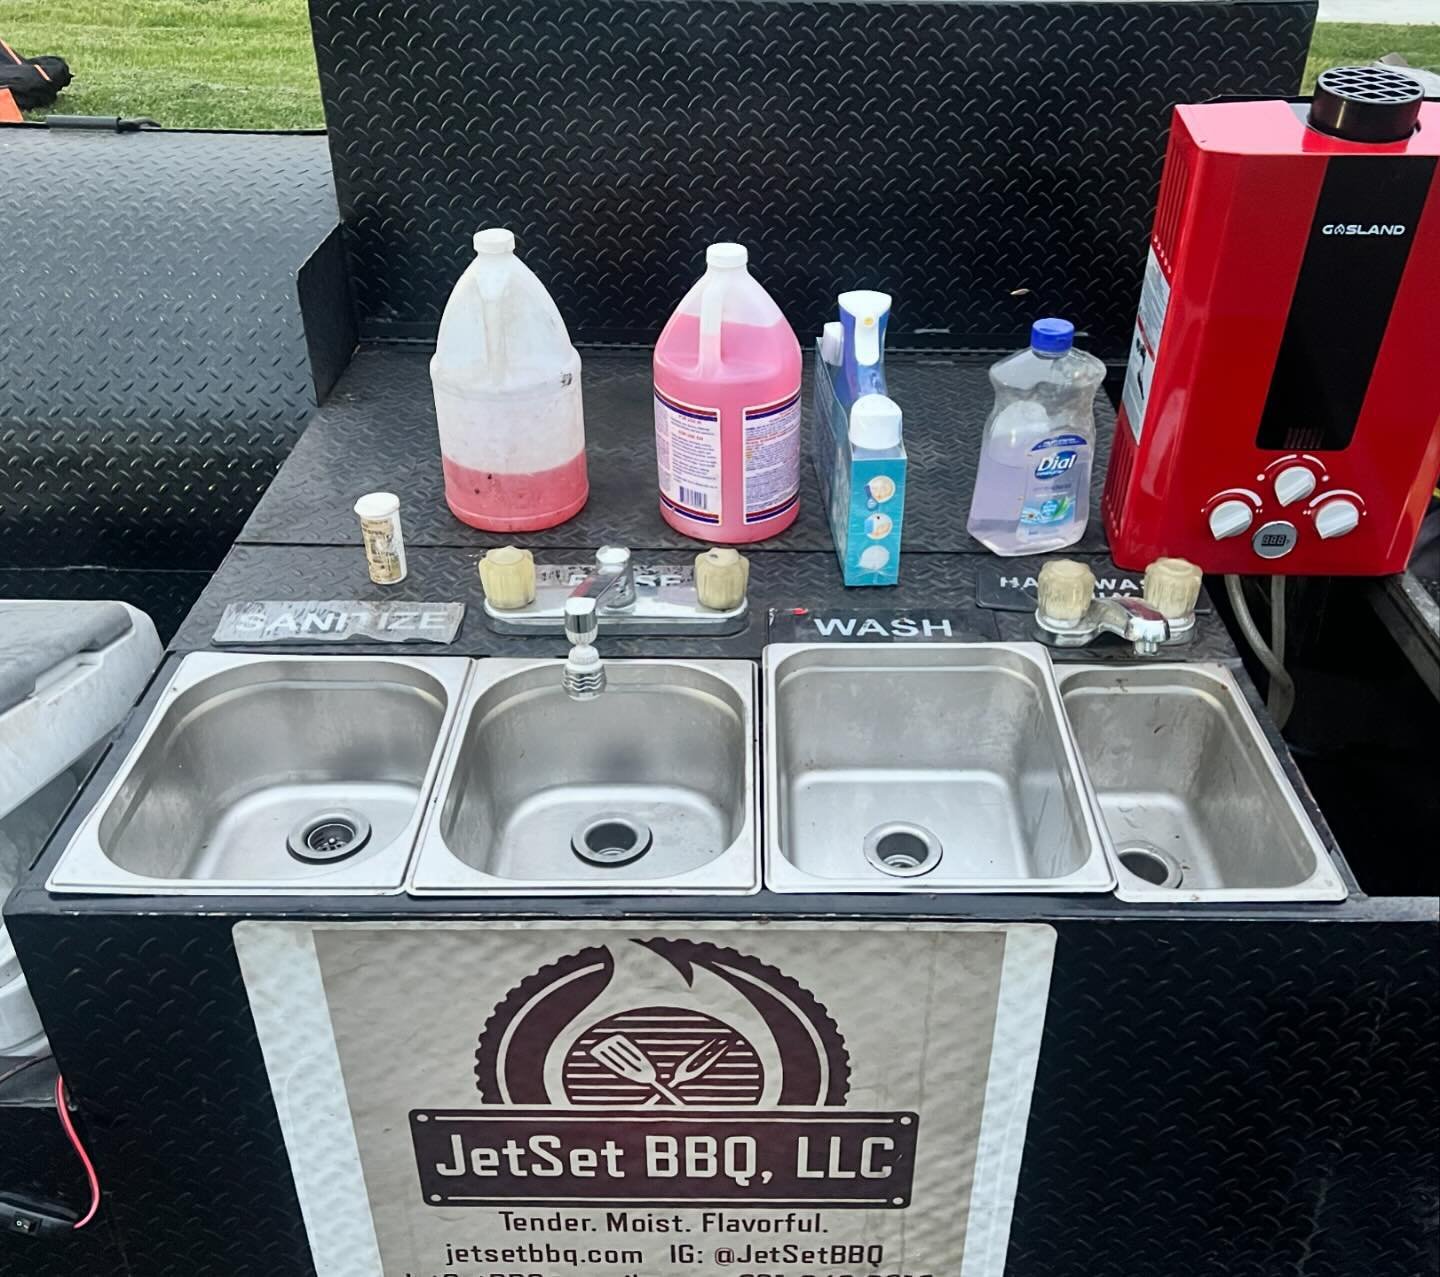 With my self-contained hot water system, my sink setup helps tremendously when it comes to passing health department inspections, and maintaining cleanliness in general. 

I&rsquo;m gearing up for the Laurel Main Street Festival, this Saturday! I&rsq